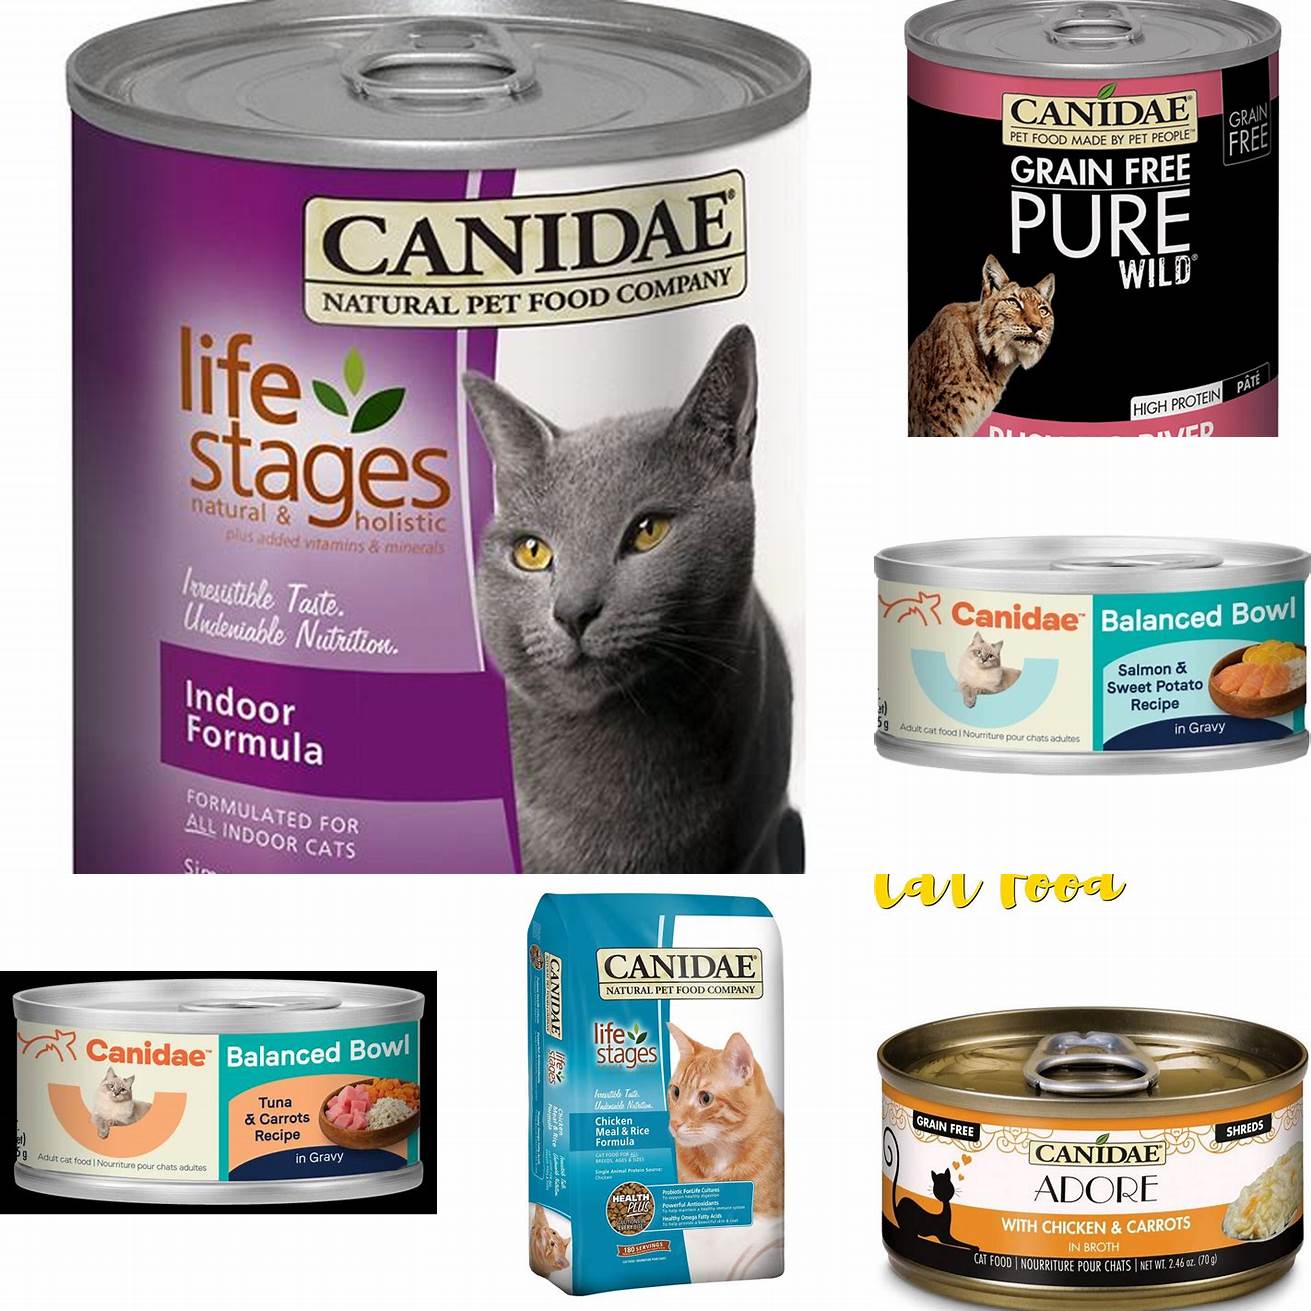 Canidae Wet Cat Food is easy to eat which makes it an ideal choice for cats of all ages